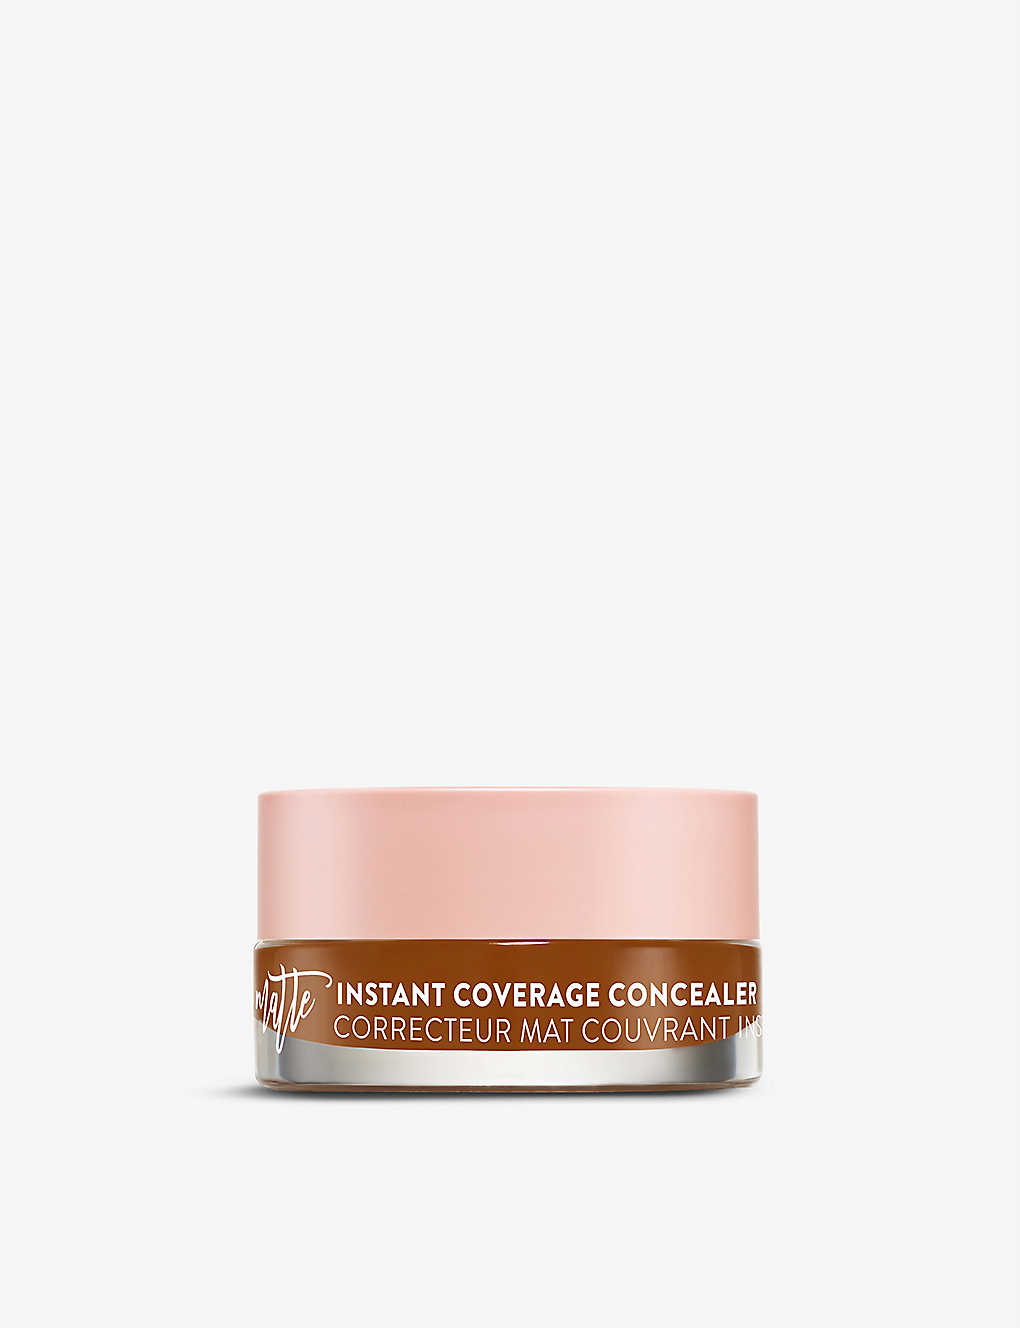 Too Faced Peach Perfect Instant Coverage Concealer 7g In Chocolate Ice Cream